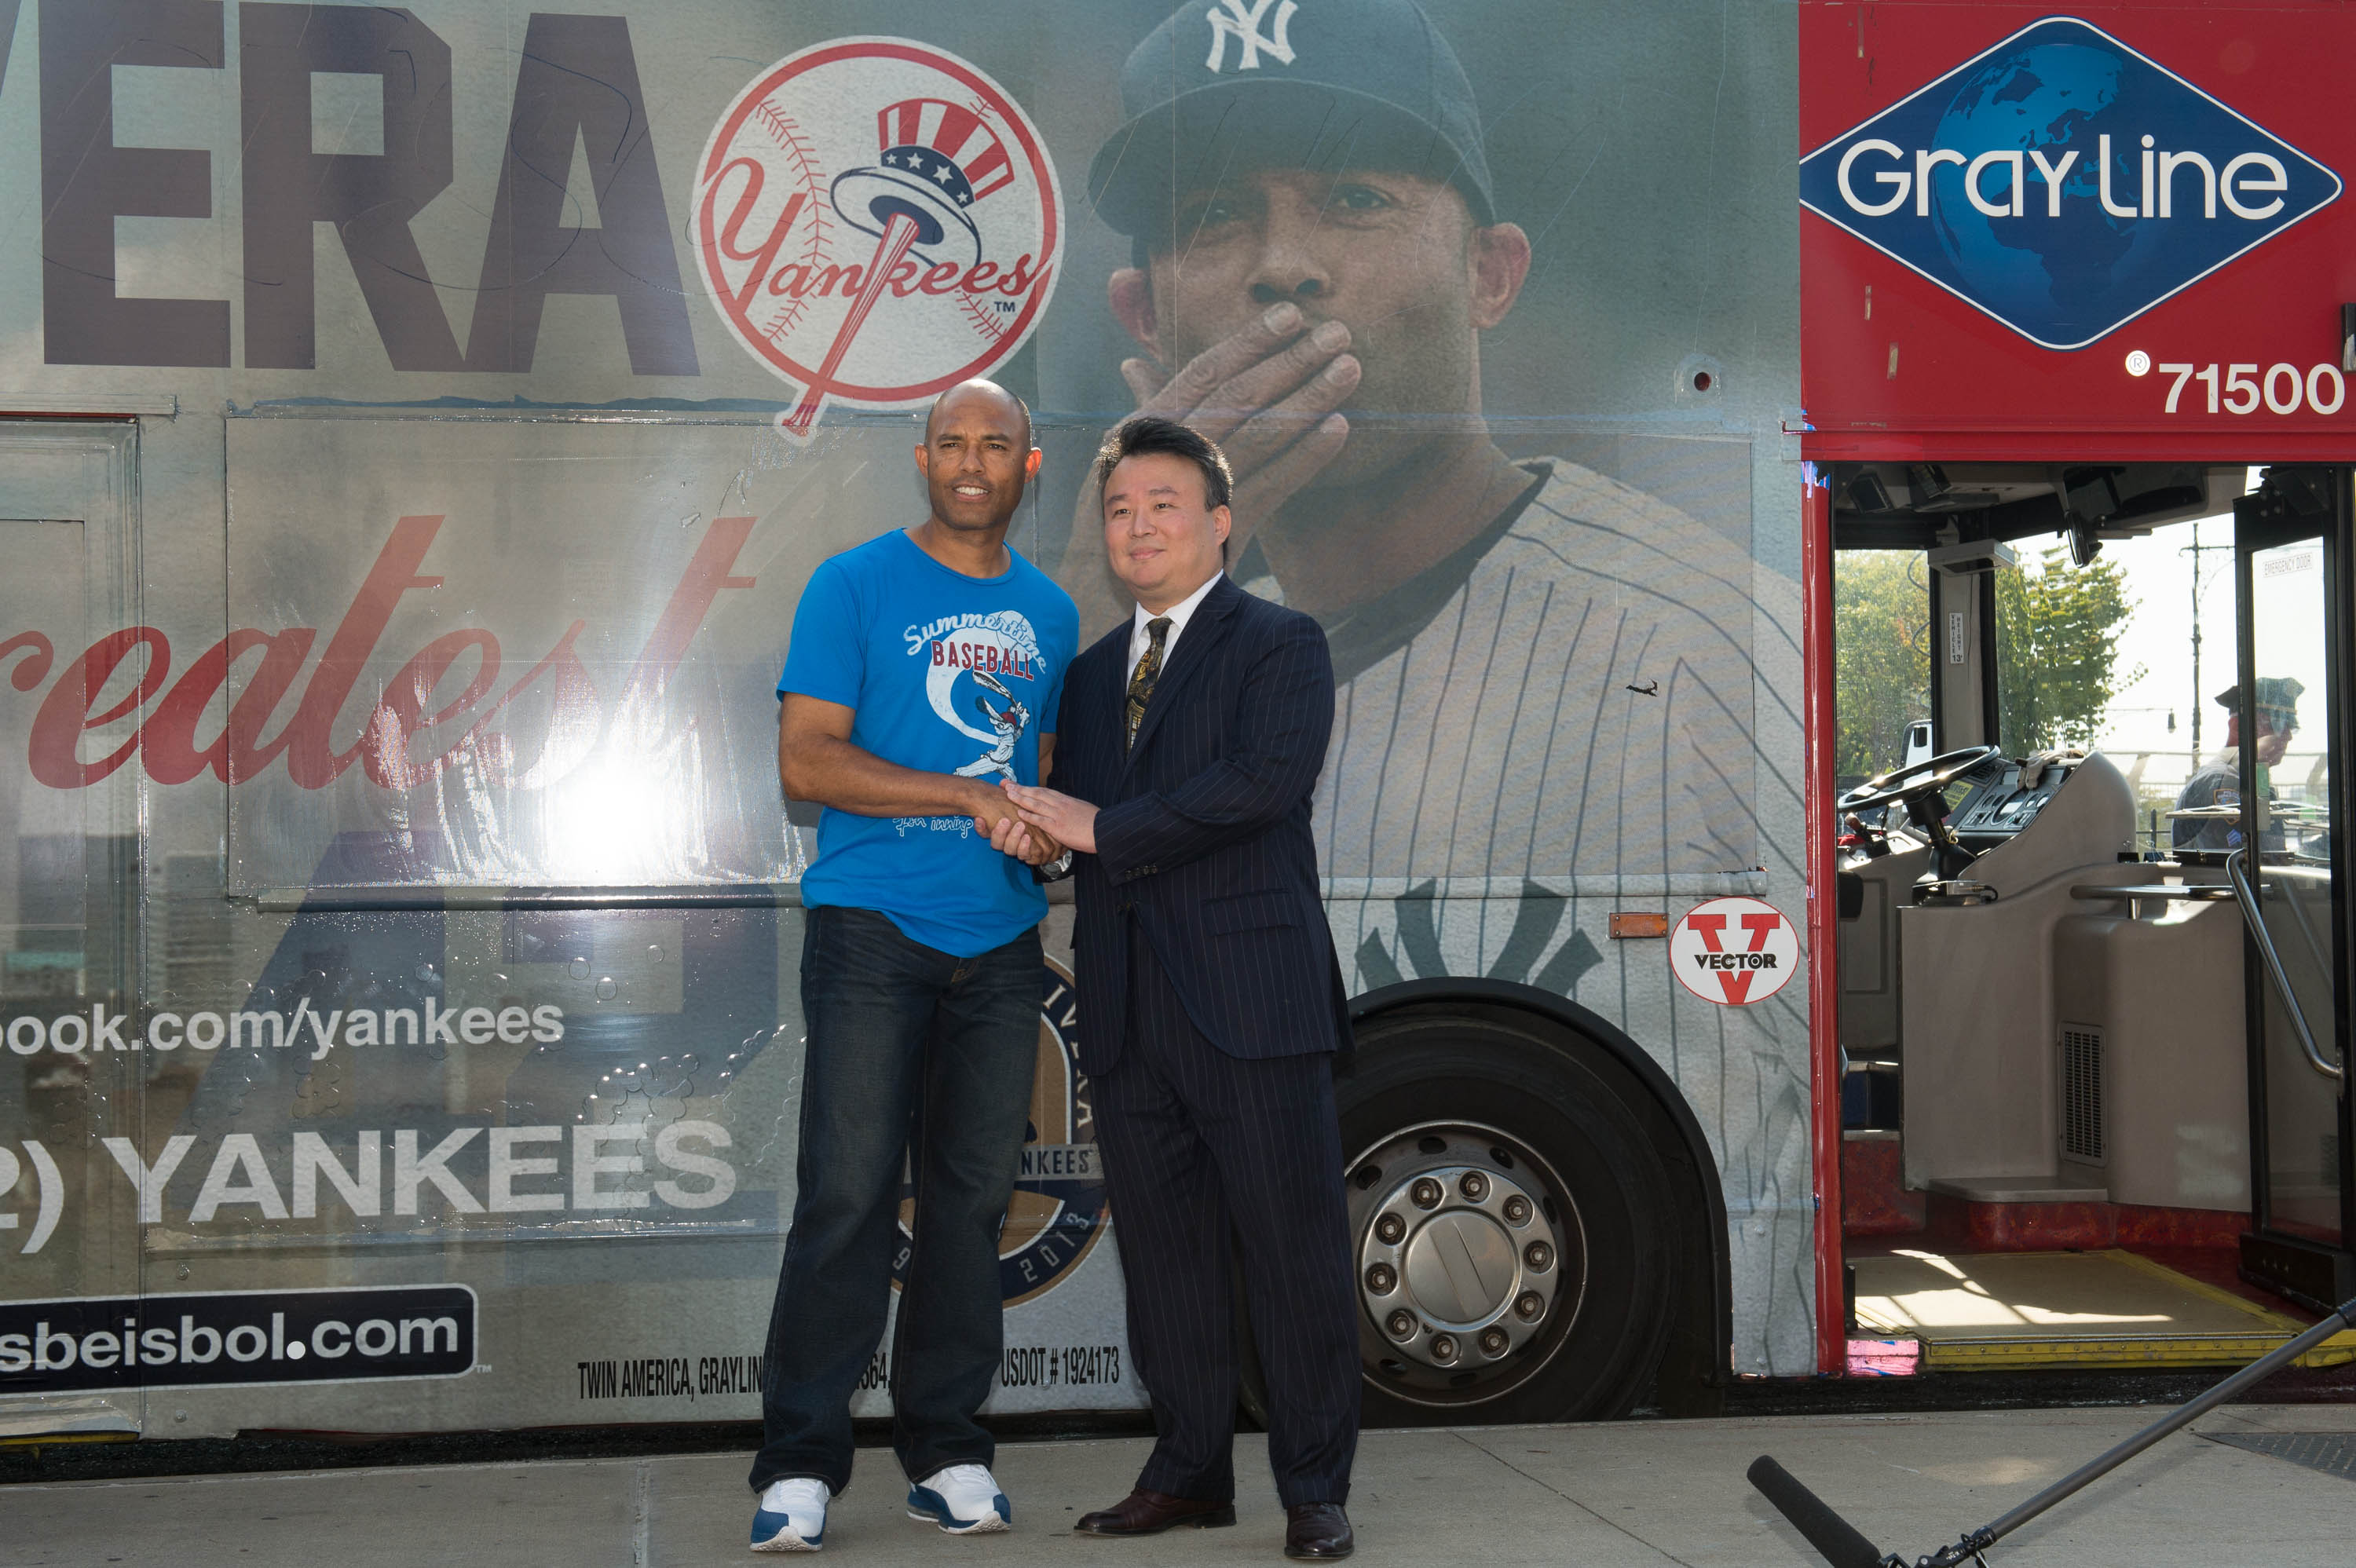 David W. Chien with Mariano Rivera at Ride of Fame (September 20th, 2013).